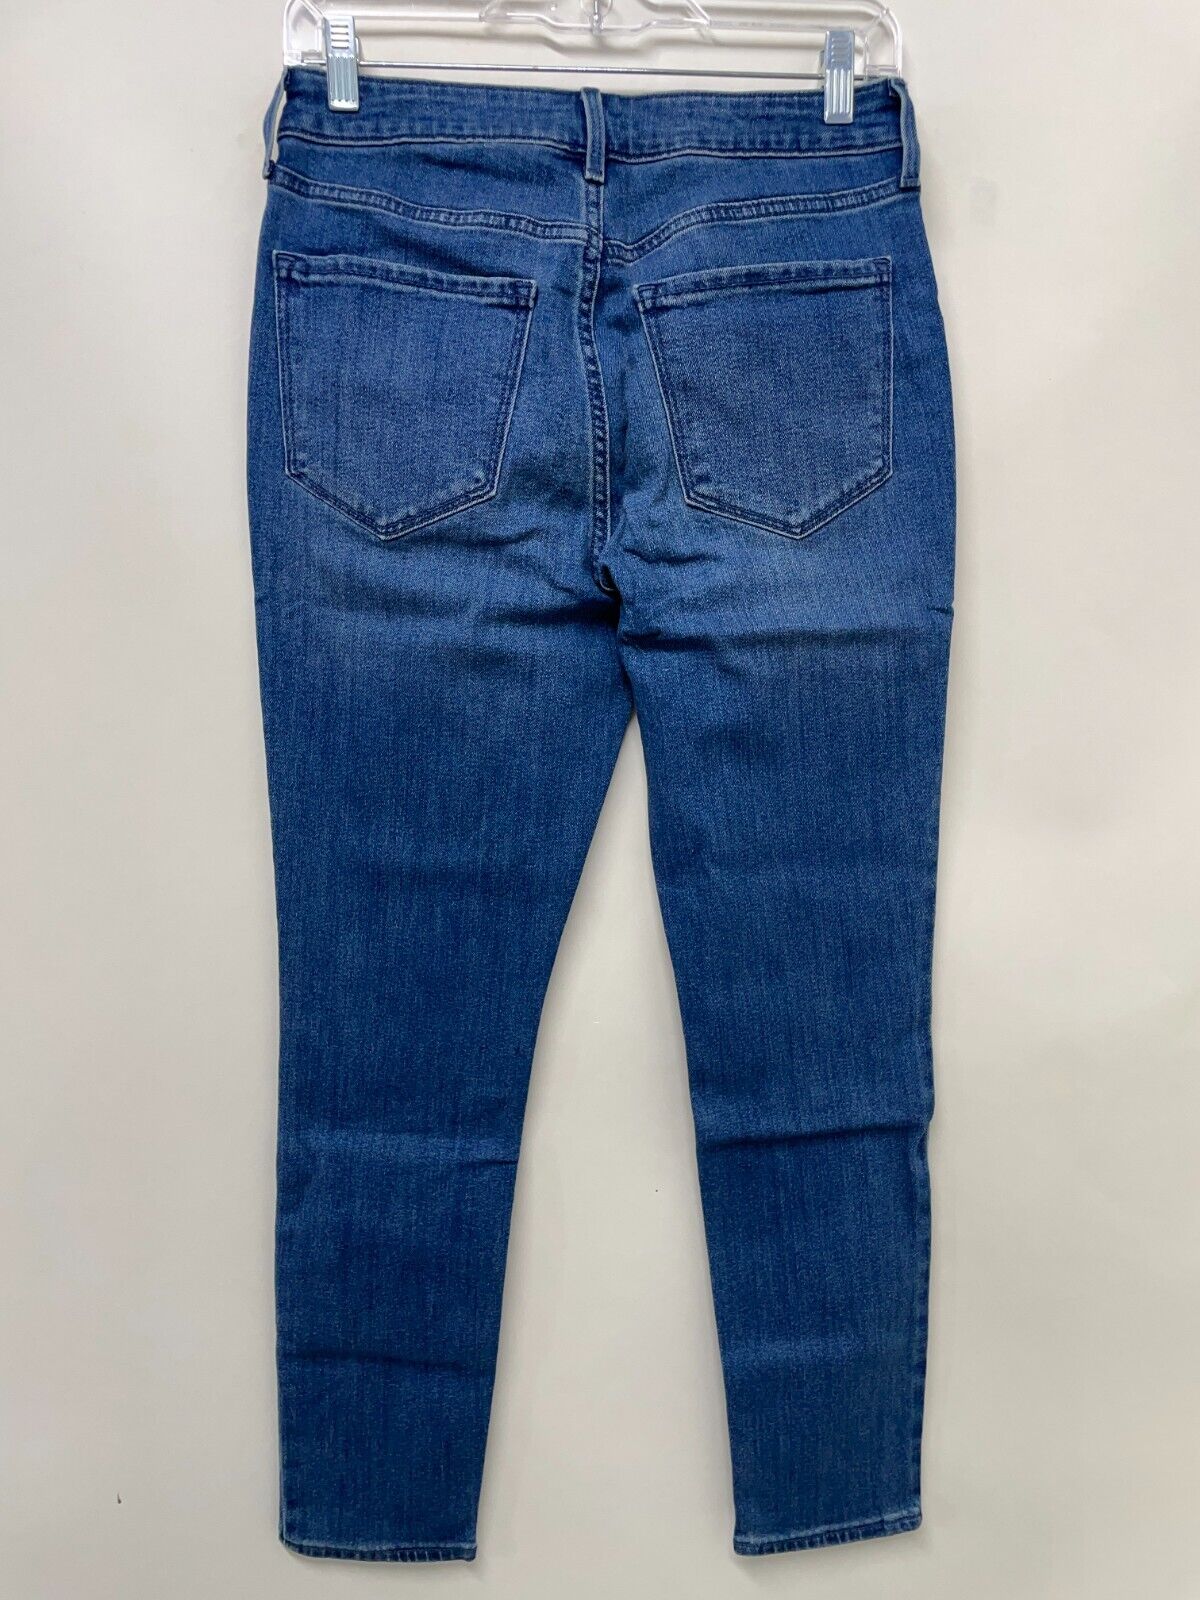 Old Navy Womens 6 Petite High-Waisted Wow Super Skinny Jeans Medium Wash 734884